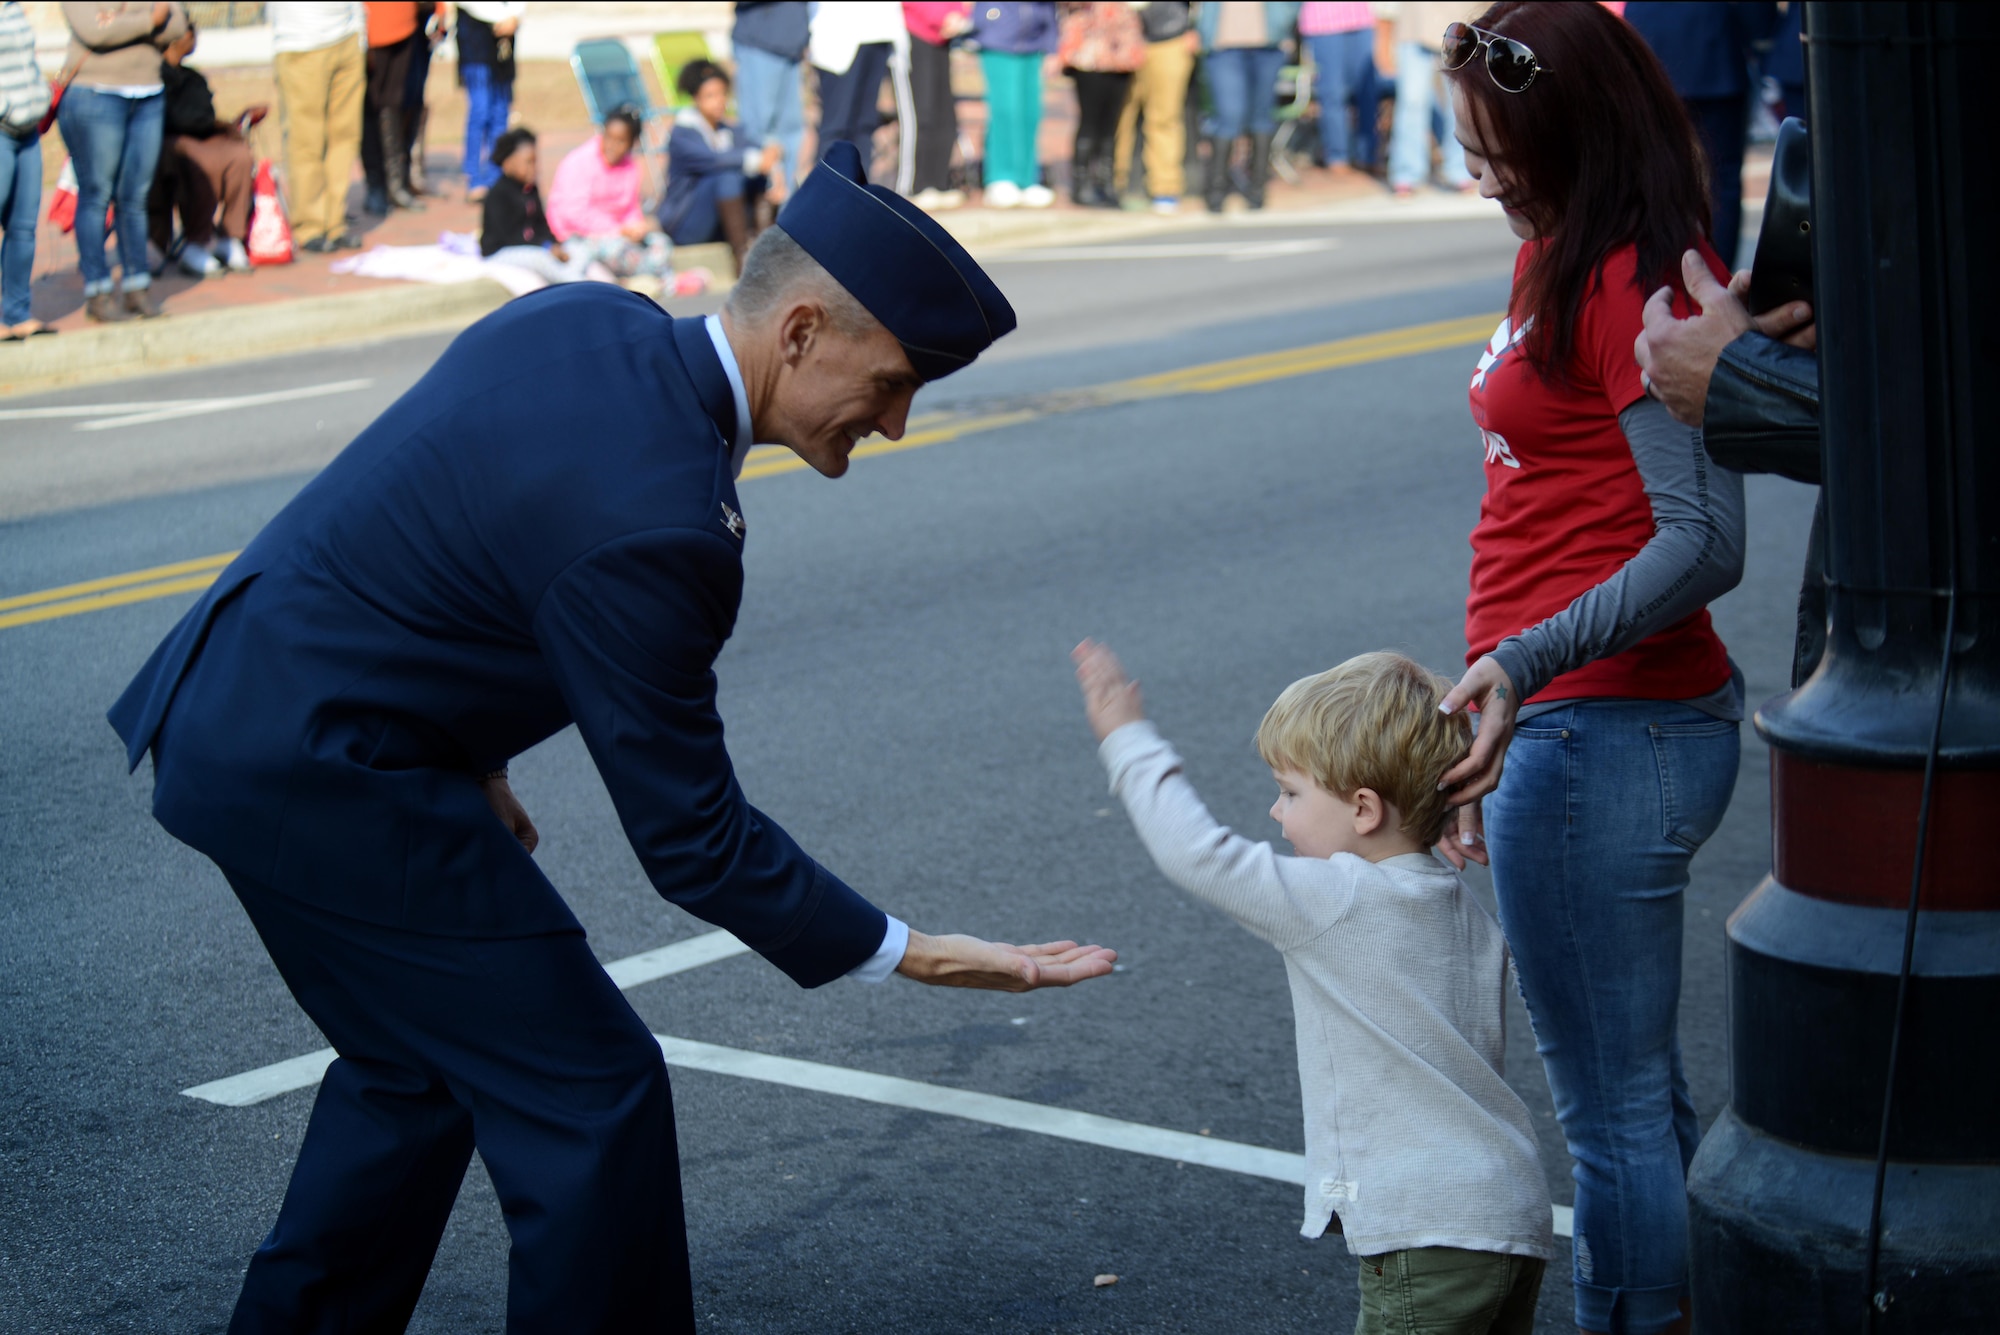 U.S. Air Force Col. Daniel Lasica, 20th Fighter Wing commander, high-fives a child during a Veterans Day parade, Sumter, S.C., Nov. 11, 2016. Airmen from the 20th FW participated in the parade alongside other representatives from surrounding communities. (U.S. Air Force photo by Airman 1st Class Kelsey Tucker)